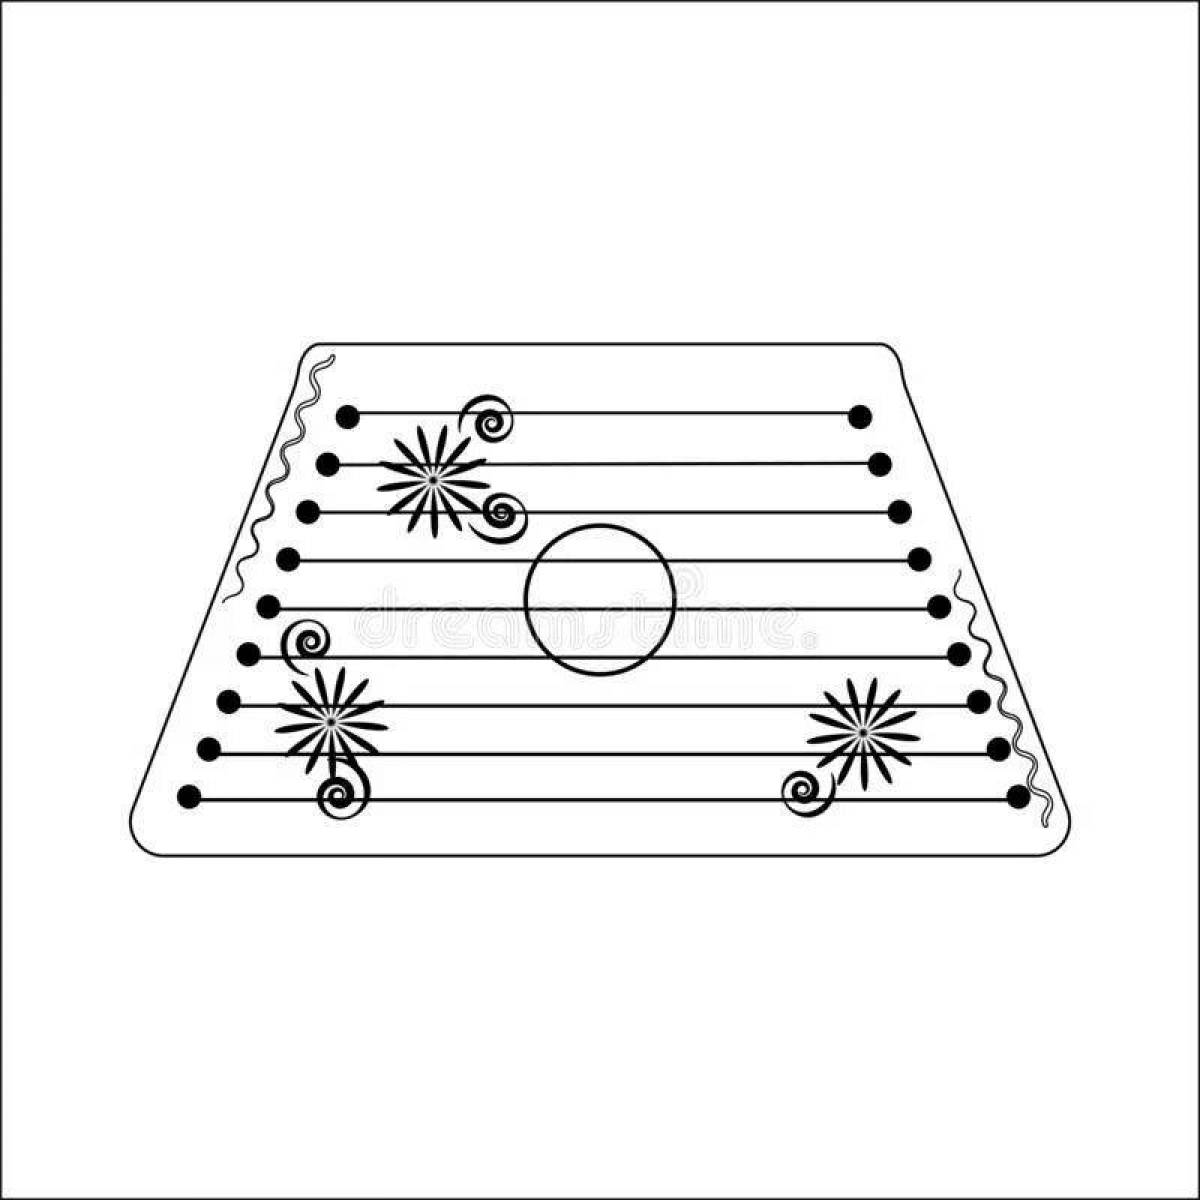 Coloring page cute musical instrument psaltery